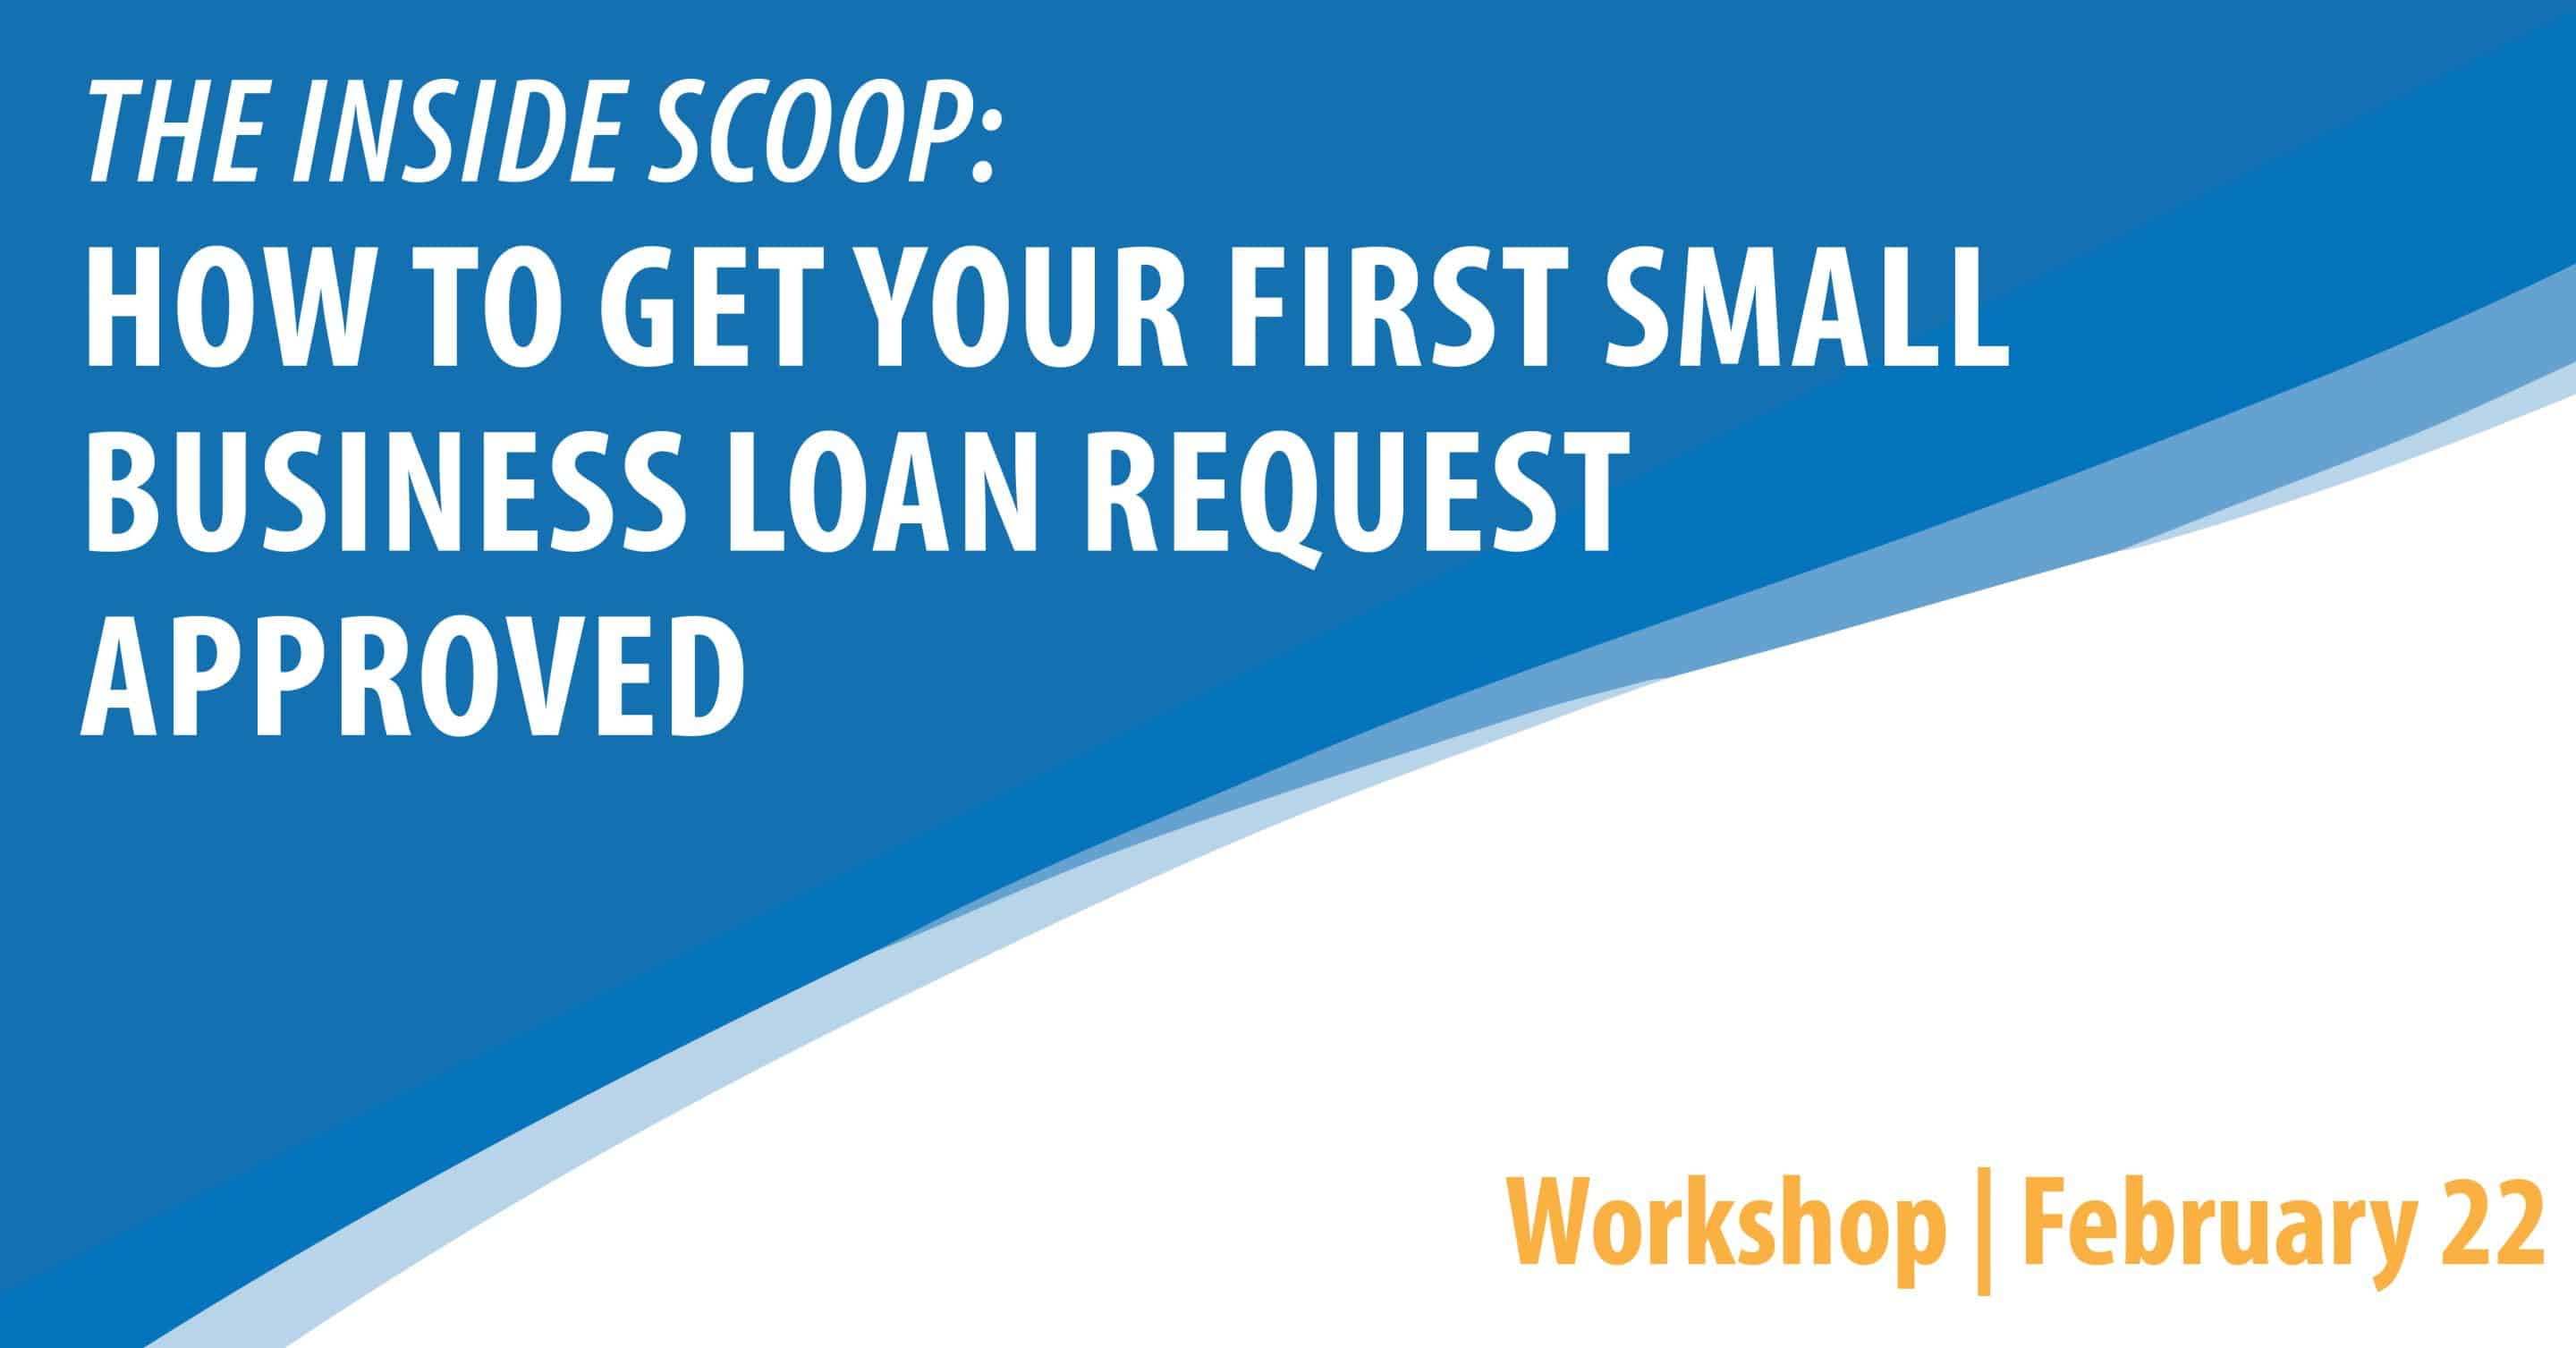 The Inside Scoop:  How to Get Your First Small Business Loan Request Approved - Casper